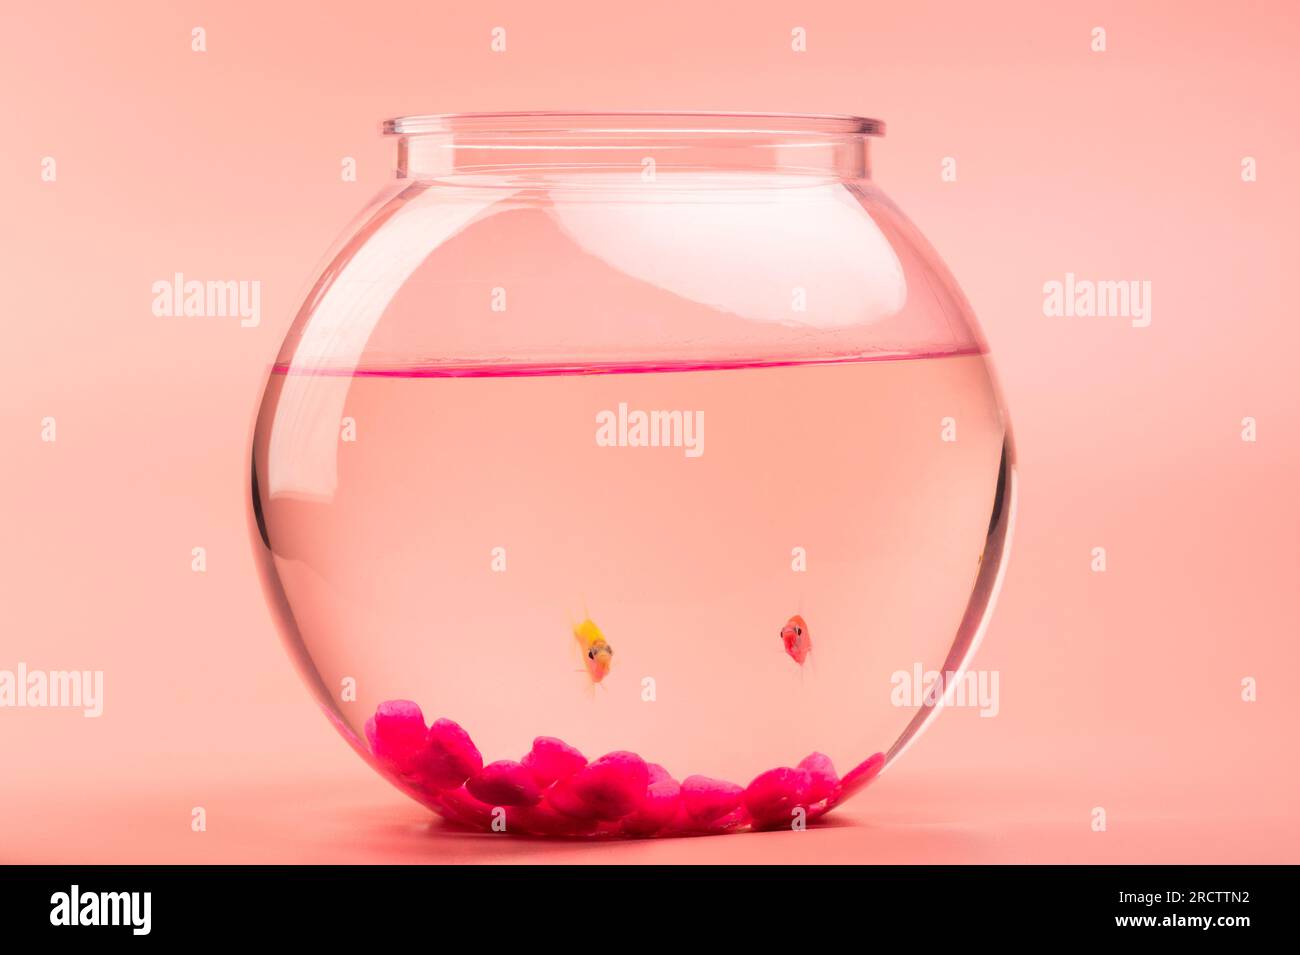 Two small fishes look in camera swimming in round aquarium bowl Stock Photo